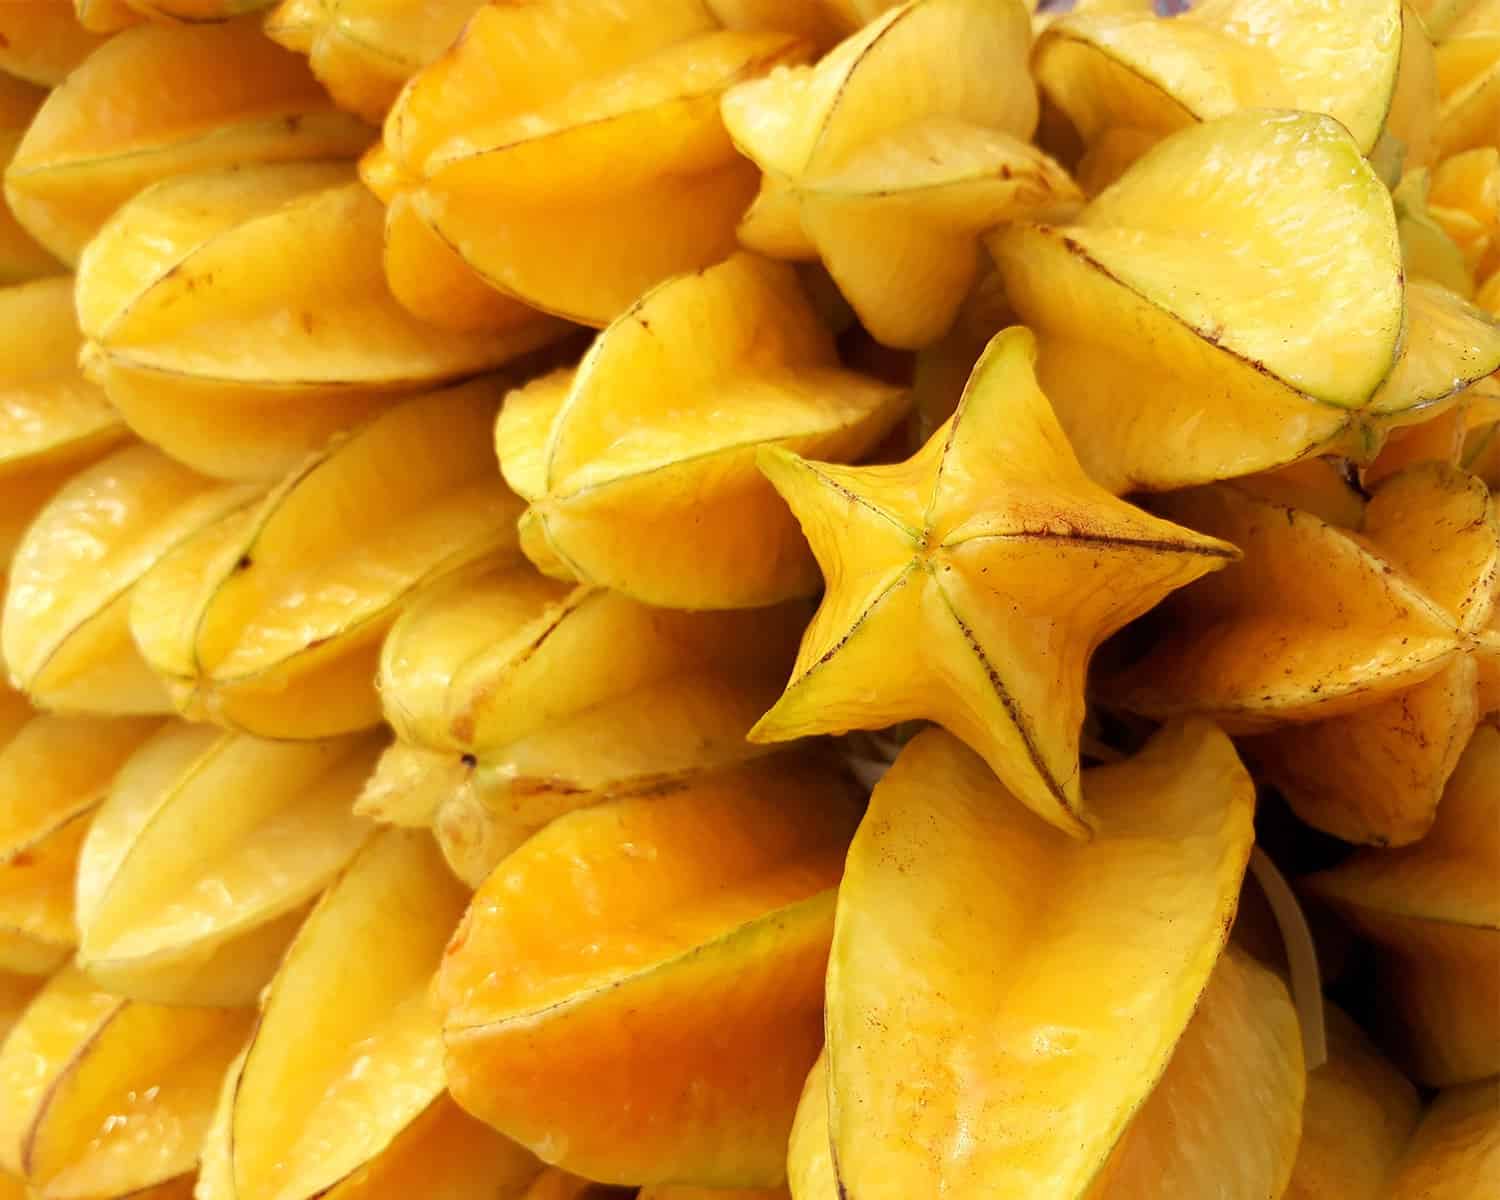 an image of a bunch of starfruit, a seasonal crop in February.